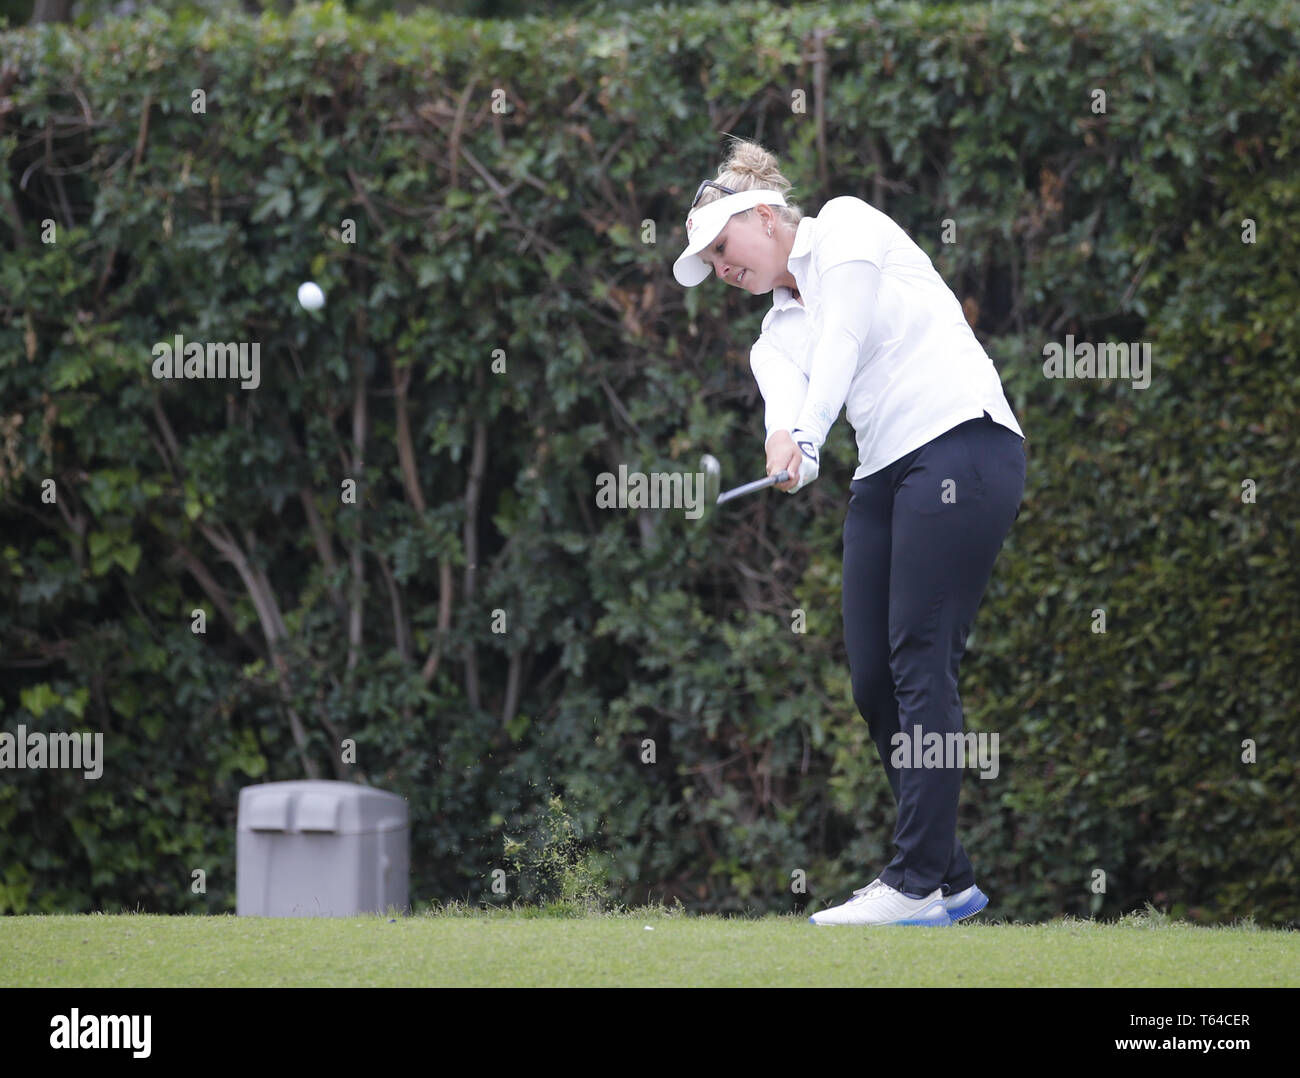 Los Angeles, California, USA. 28th Apr, 2019. Nanna Koerstz Madsen of Denmark in actions during the final round of the HUGEL-AIR PREMIA LA Open LPGA golf tournament at Wilshire Country on April 28, 2019, in Los Angeles. Credit: Ringo Chiu/ZUMA Wire/Alamy Live News Stock Photo